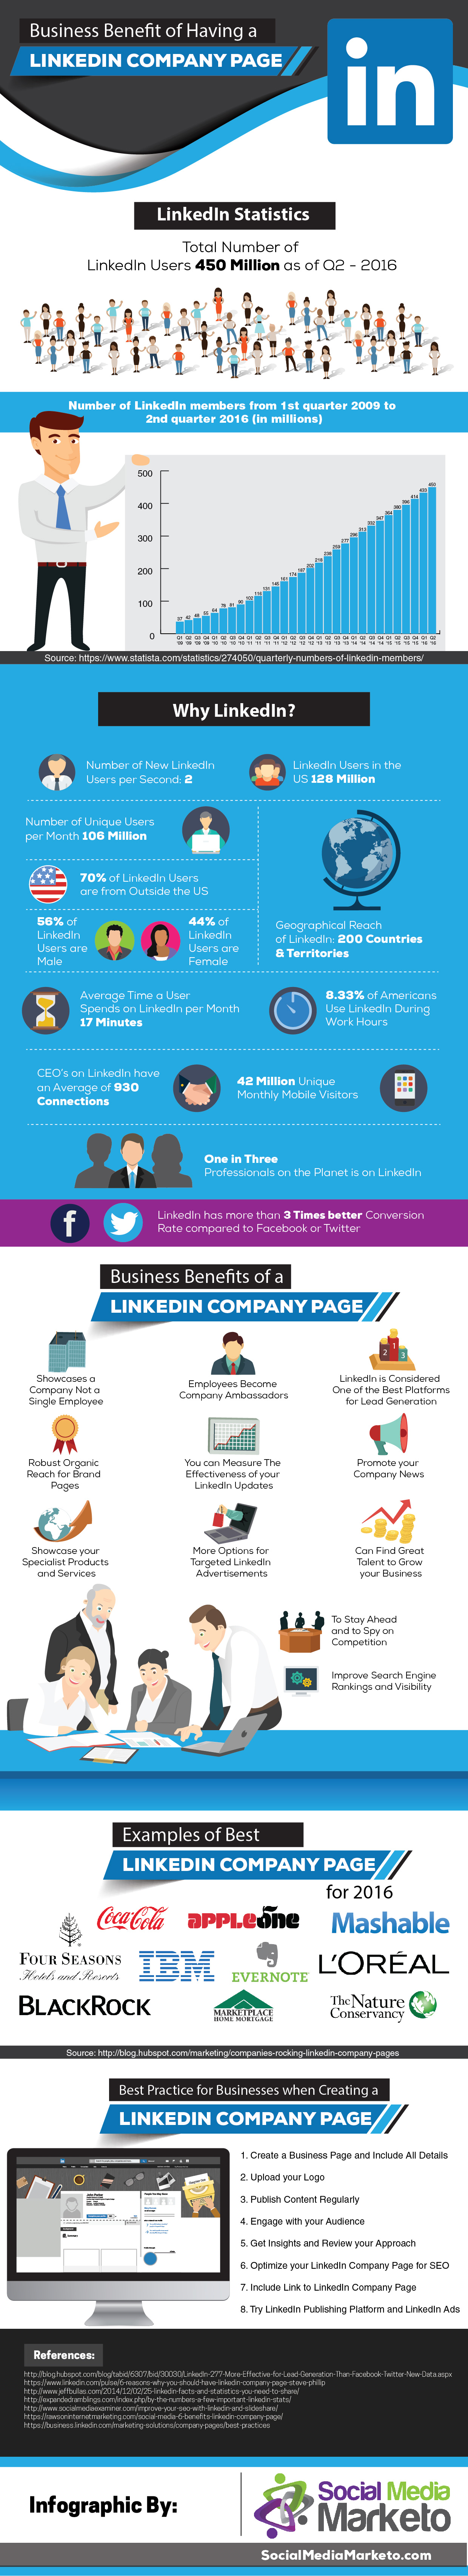 business-benefit-of-having-a-linkedin-company-page-infographic